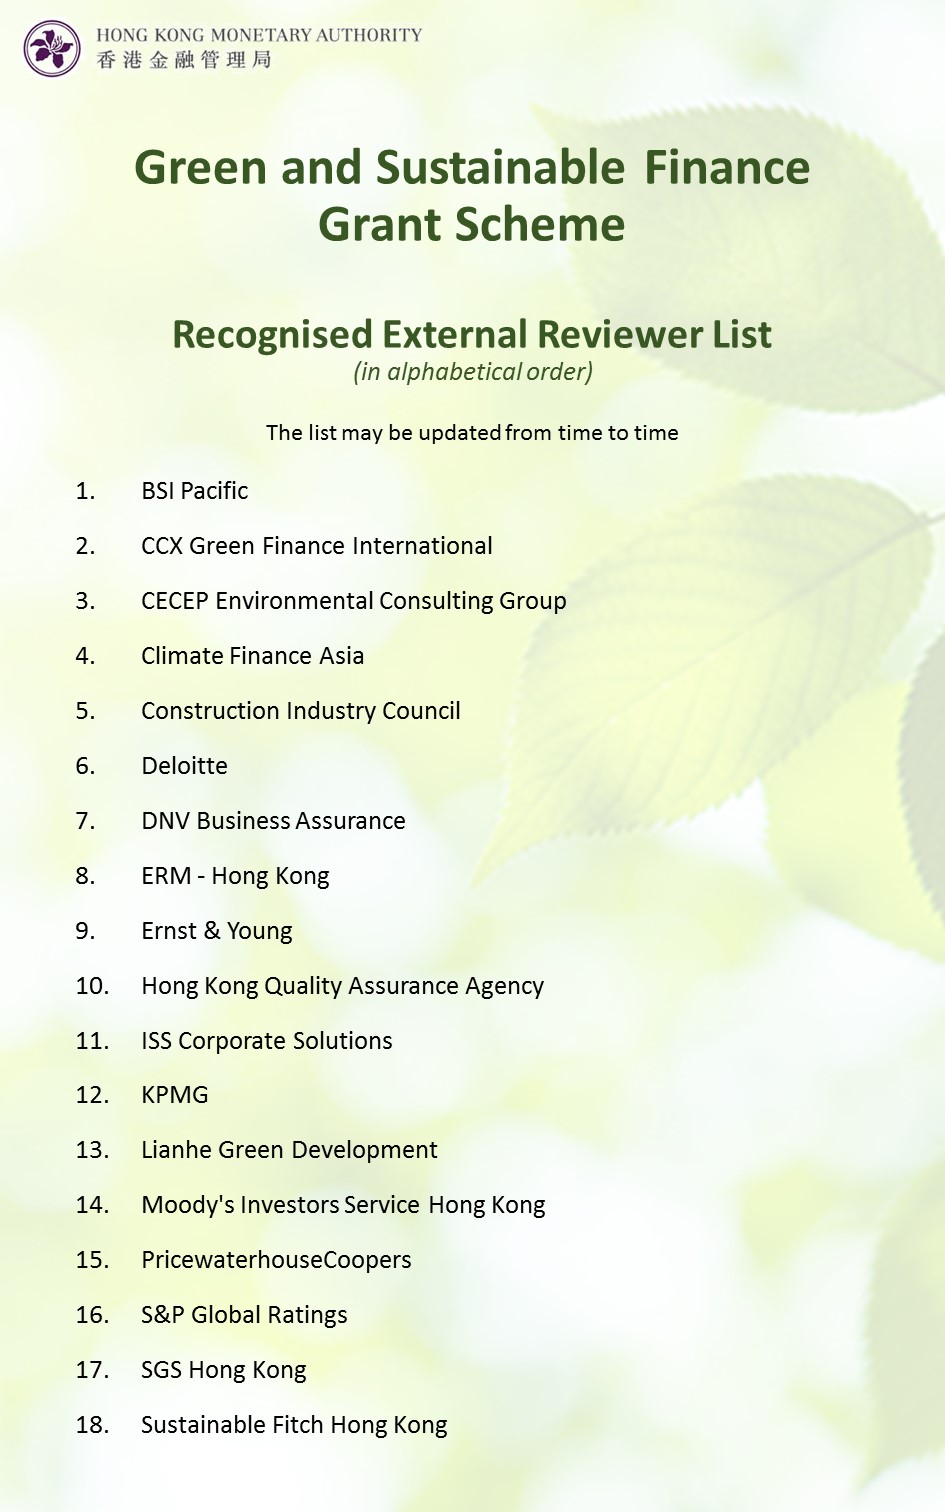 Recognised External Reviewer List (click to enlarge)